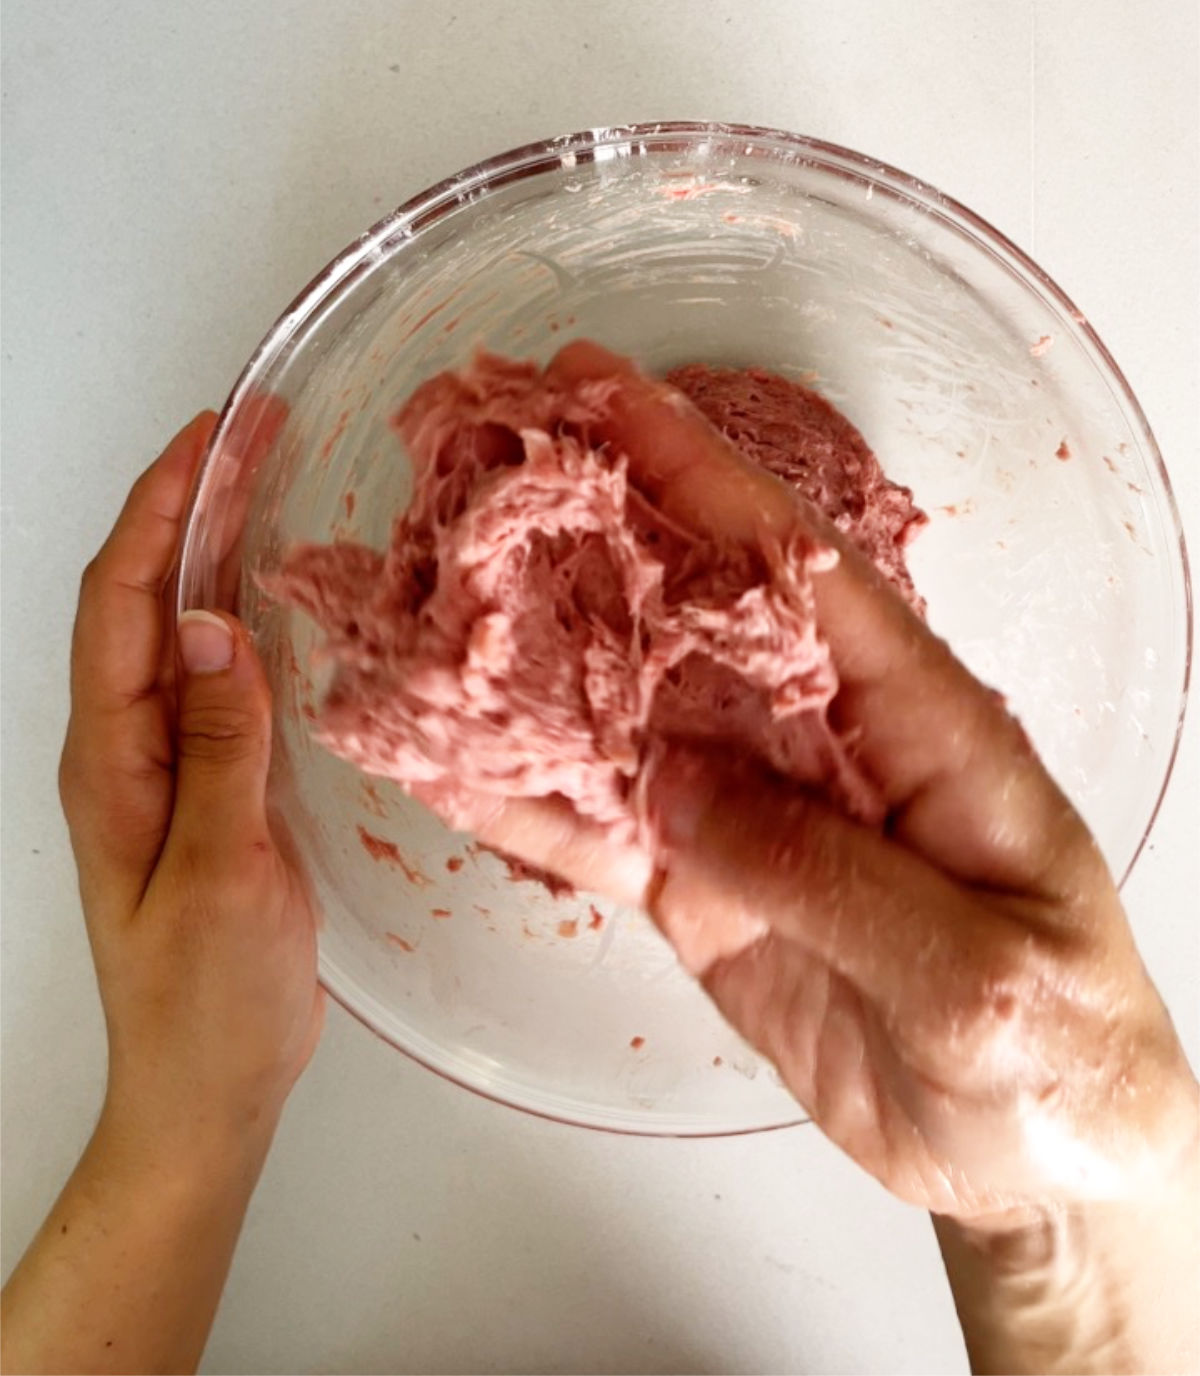 Kneading meat in a glass bowl.